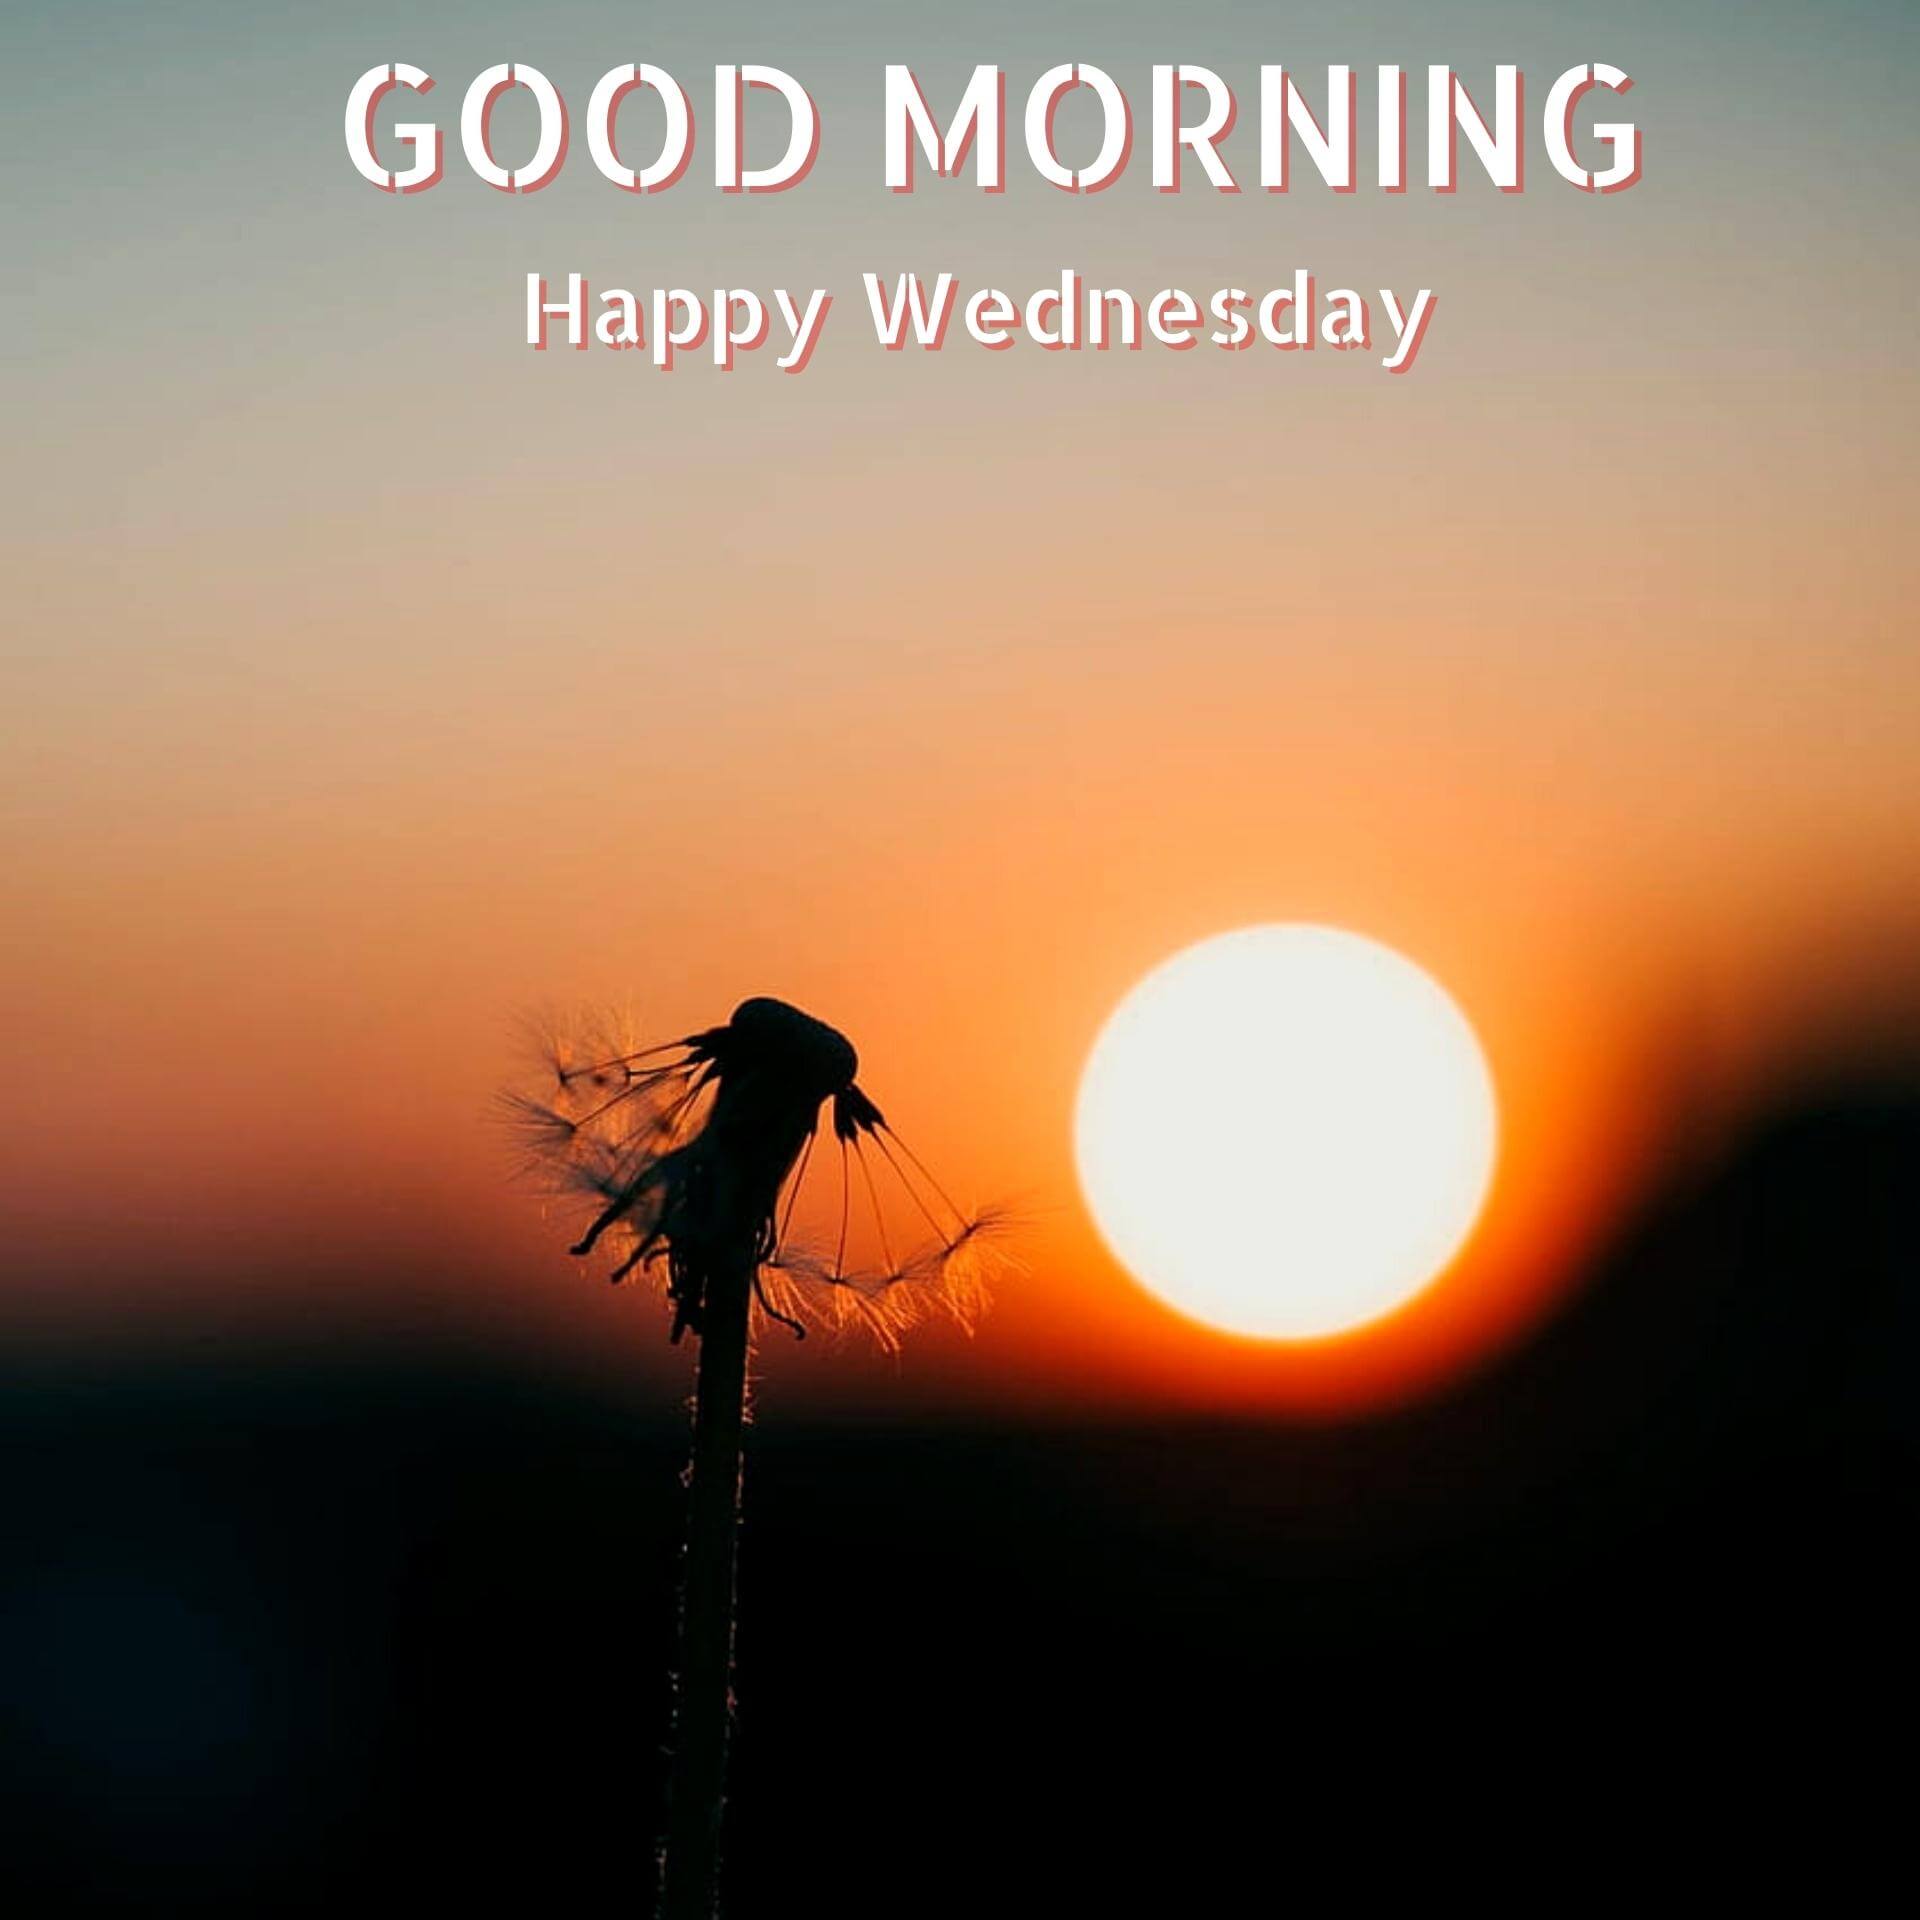 Wednesday good morning Pics Wallpaper With Sunrise (2)